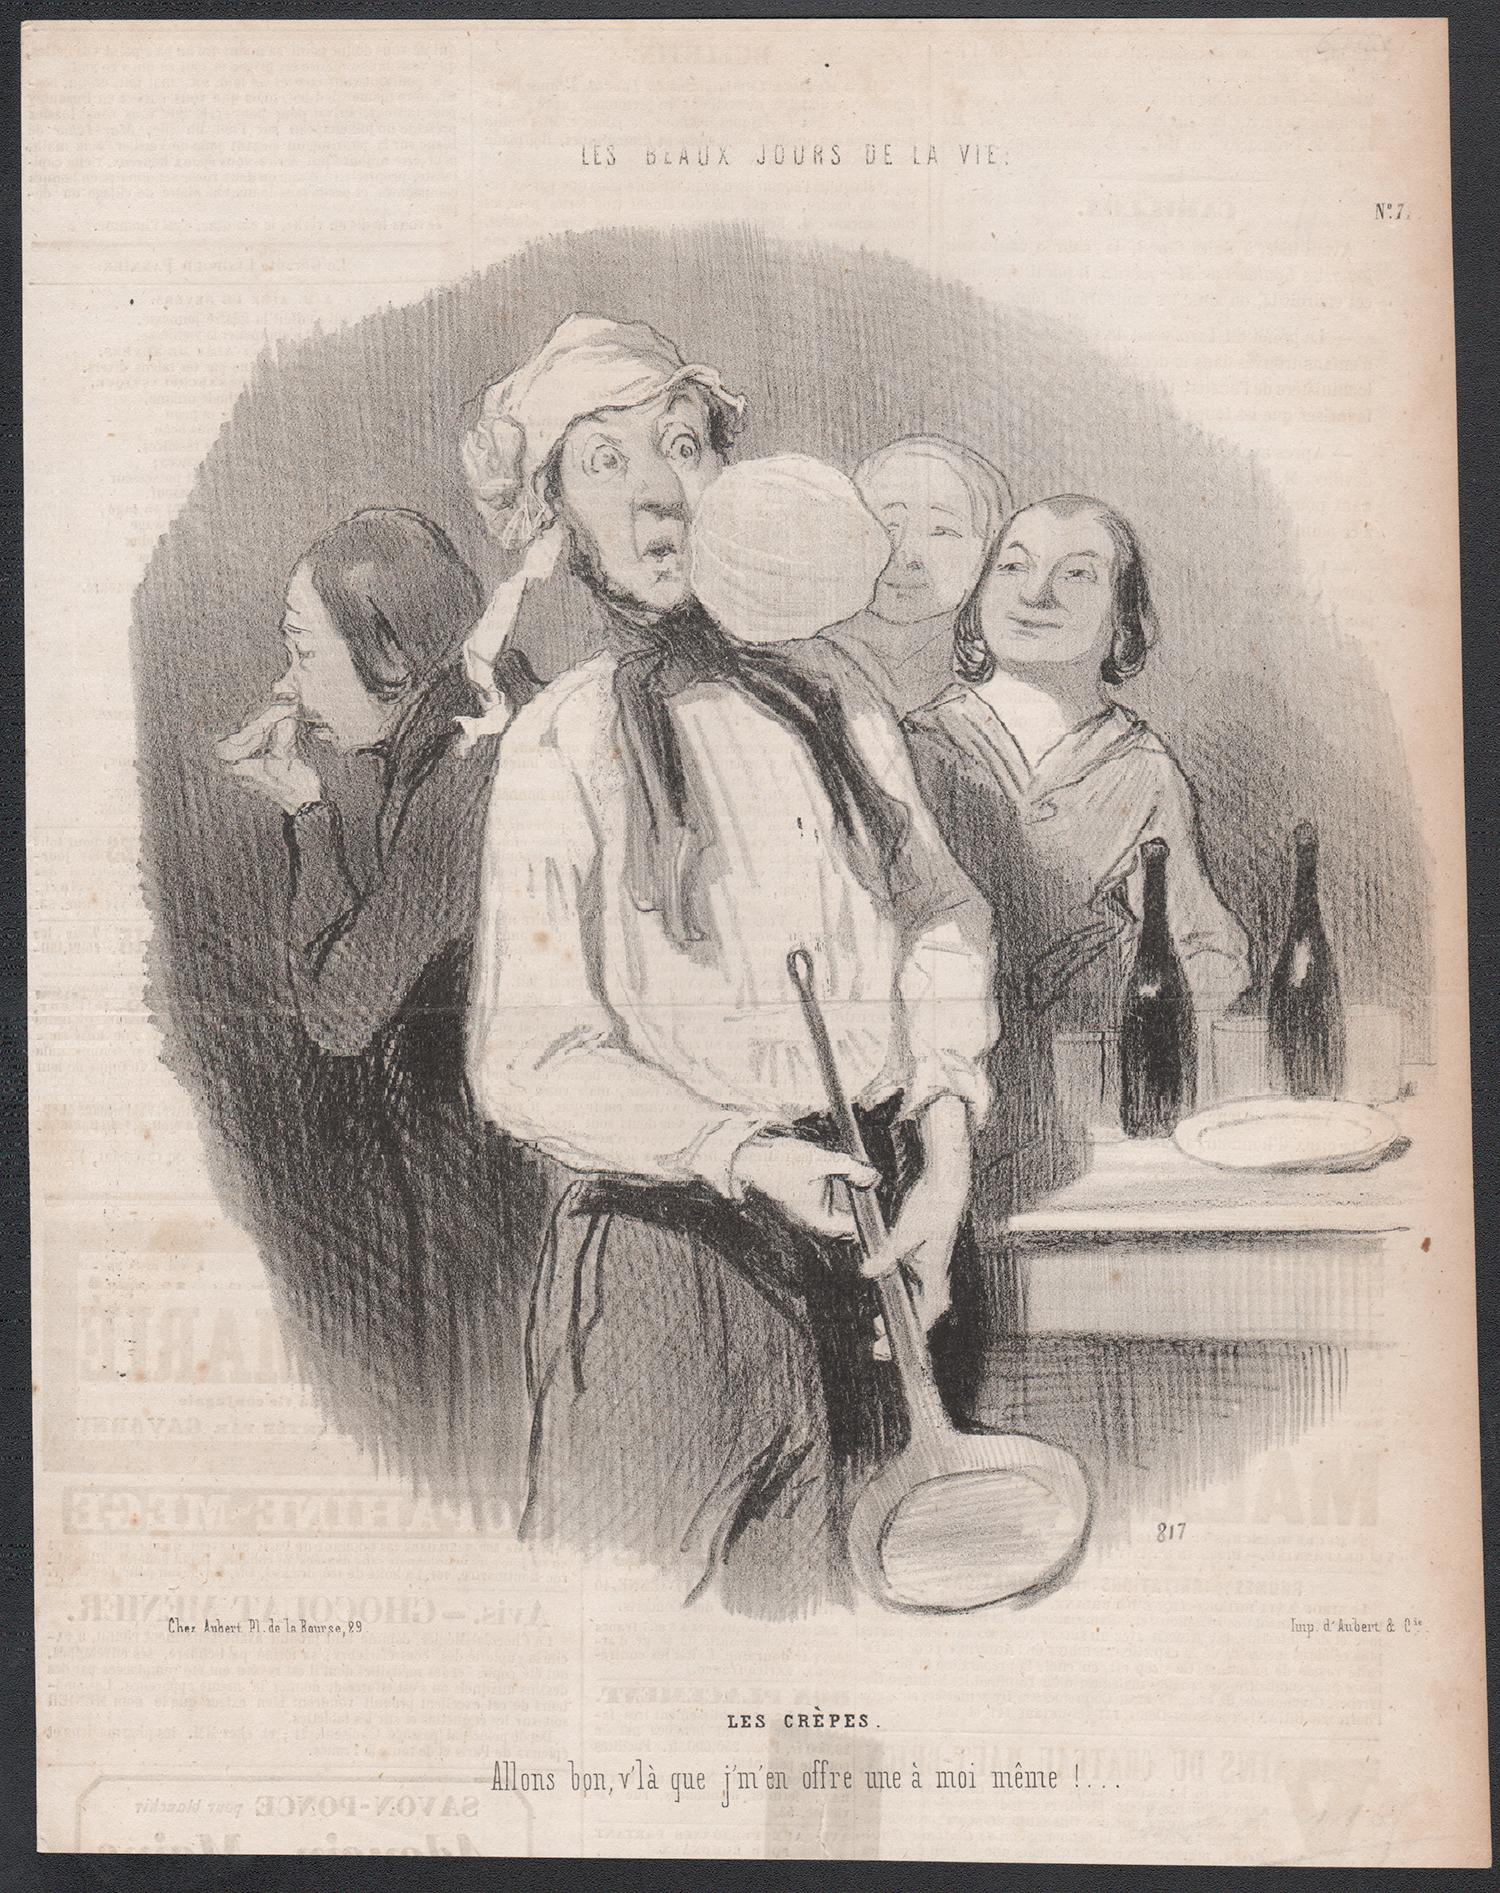 Les Crepes, French pancake cooking kitchen lithograph by Honore Daumier, 1848 - Print by Honoré Daumier